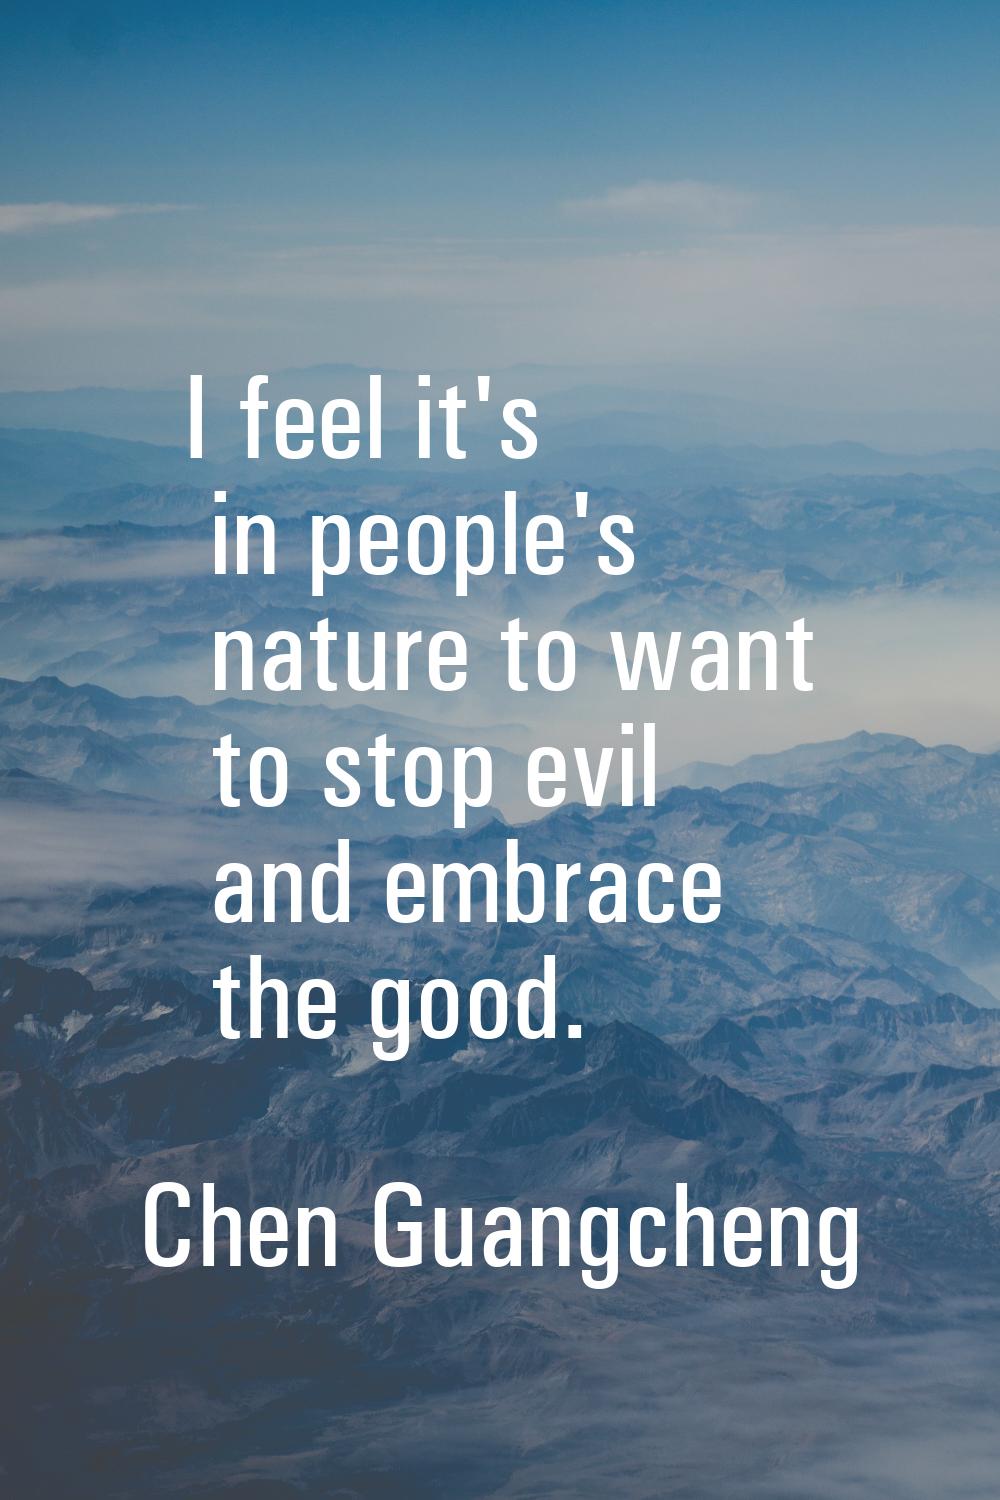 I feel it's in people's nature to want to stop evil and embrace the good.